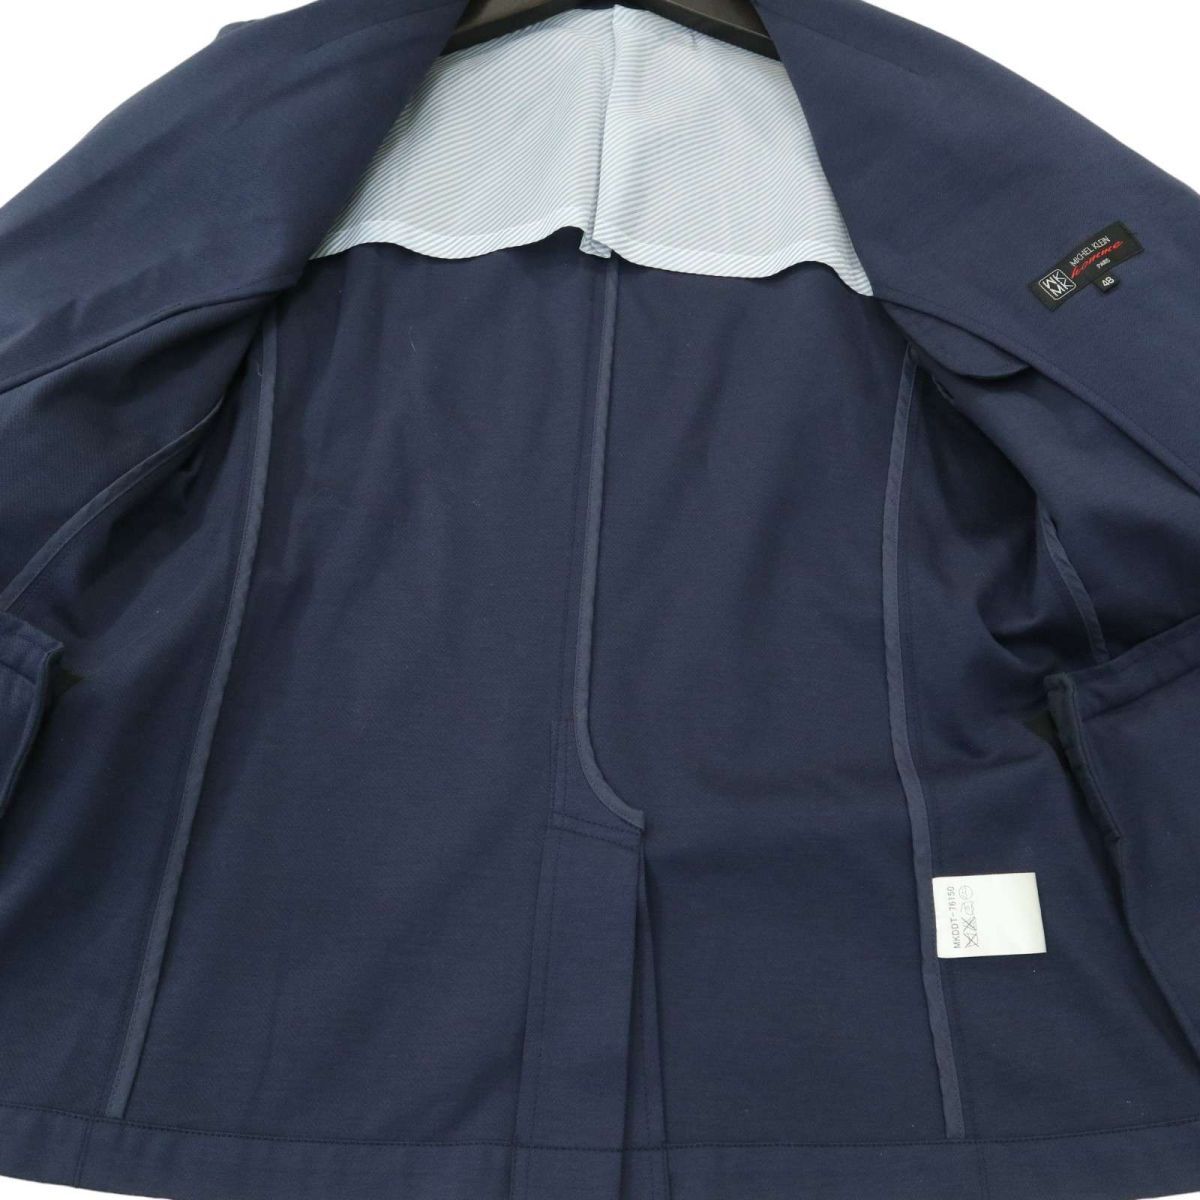 MK HOMME Michel Klein Homme through year unlined in the back * Anne navy blue tailored jacket Sz.48 men's navy A4T01383_2#O